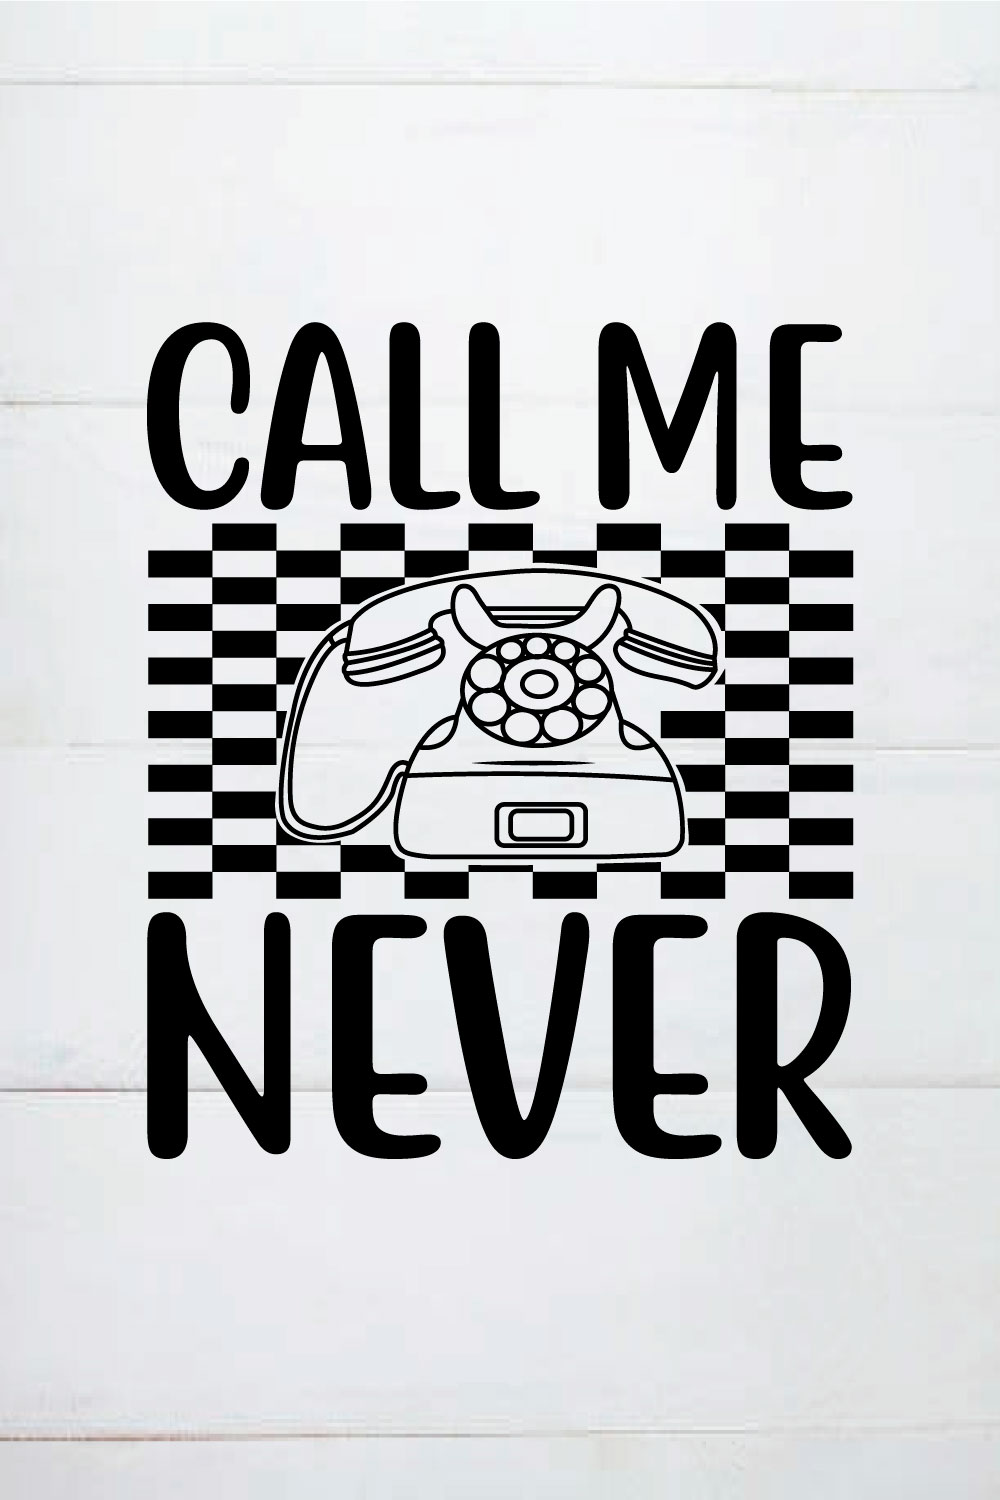 Call me never shirt pinterest preview image.